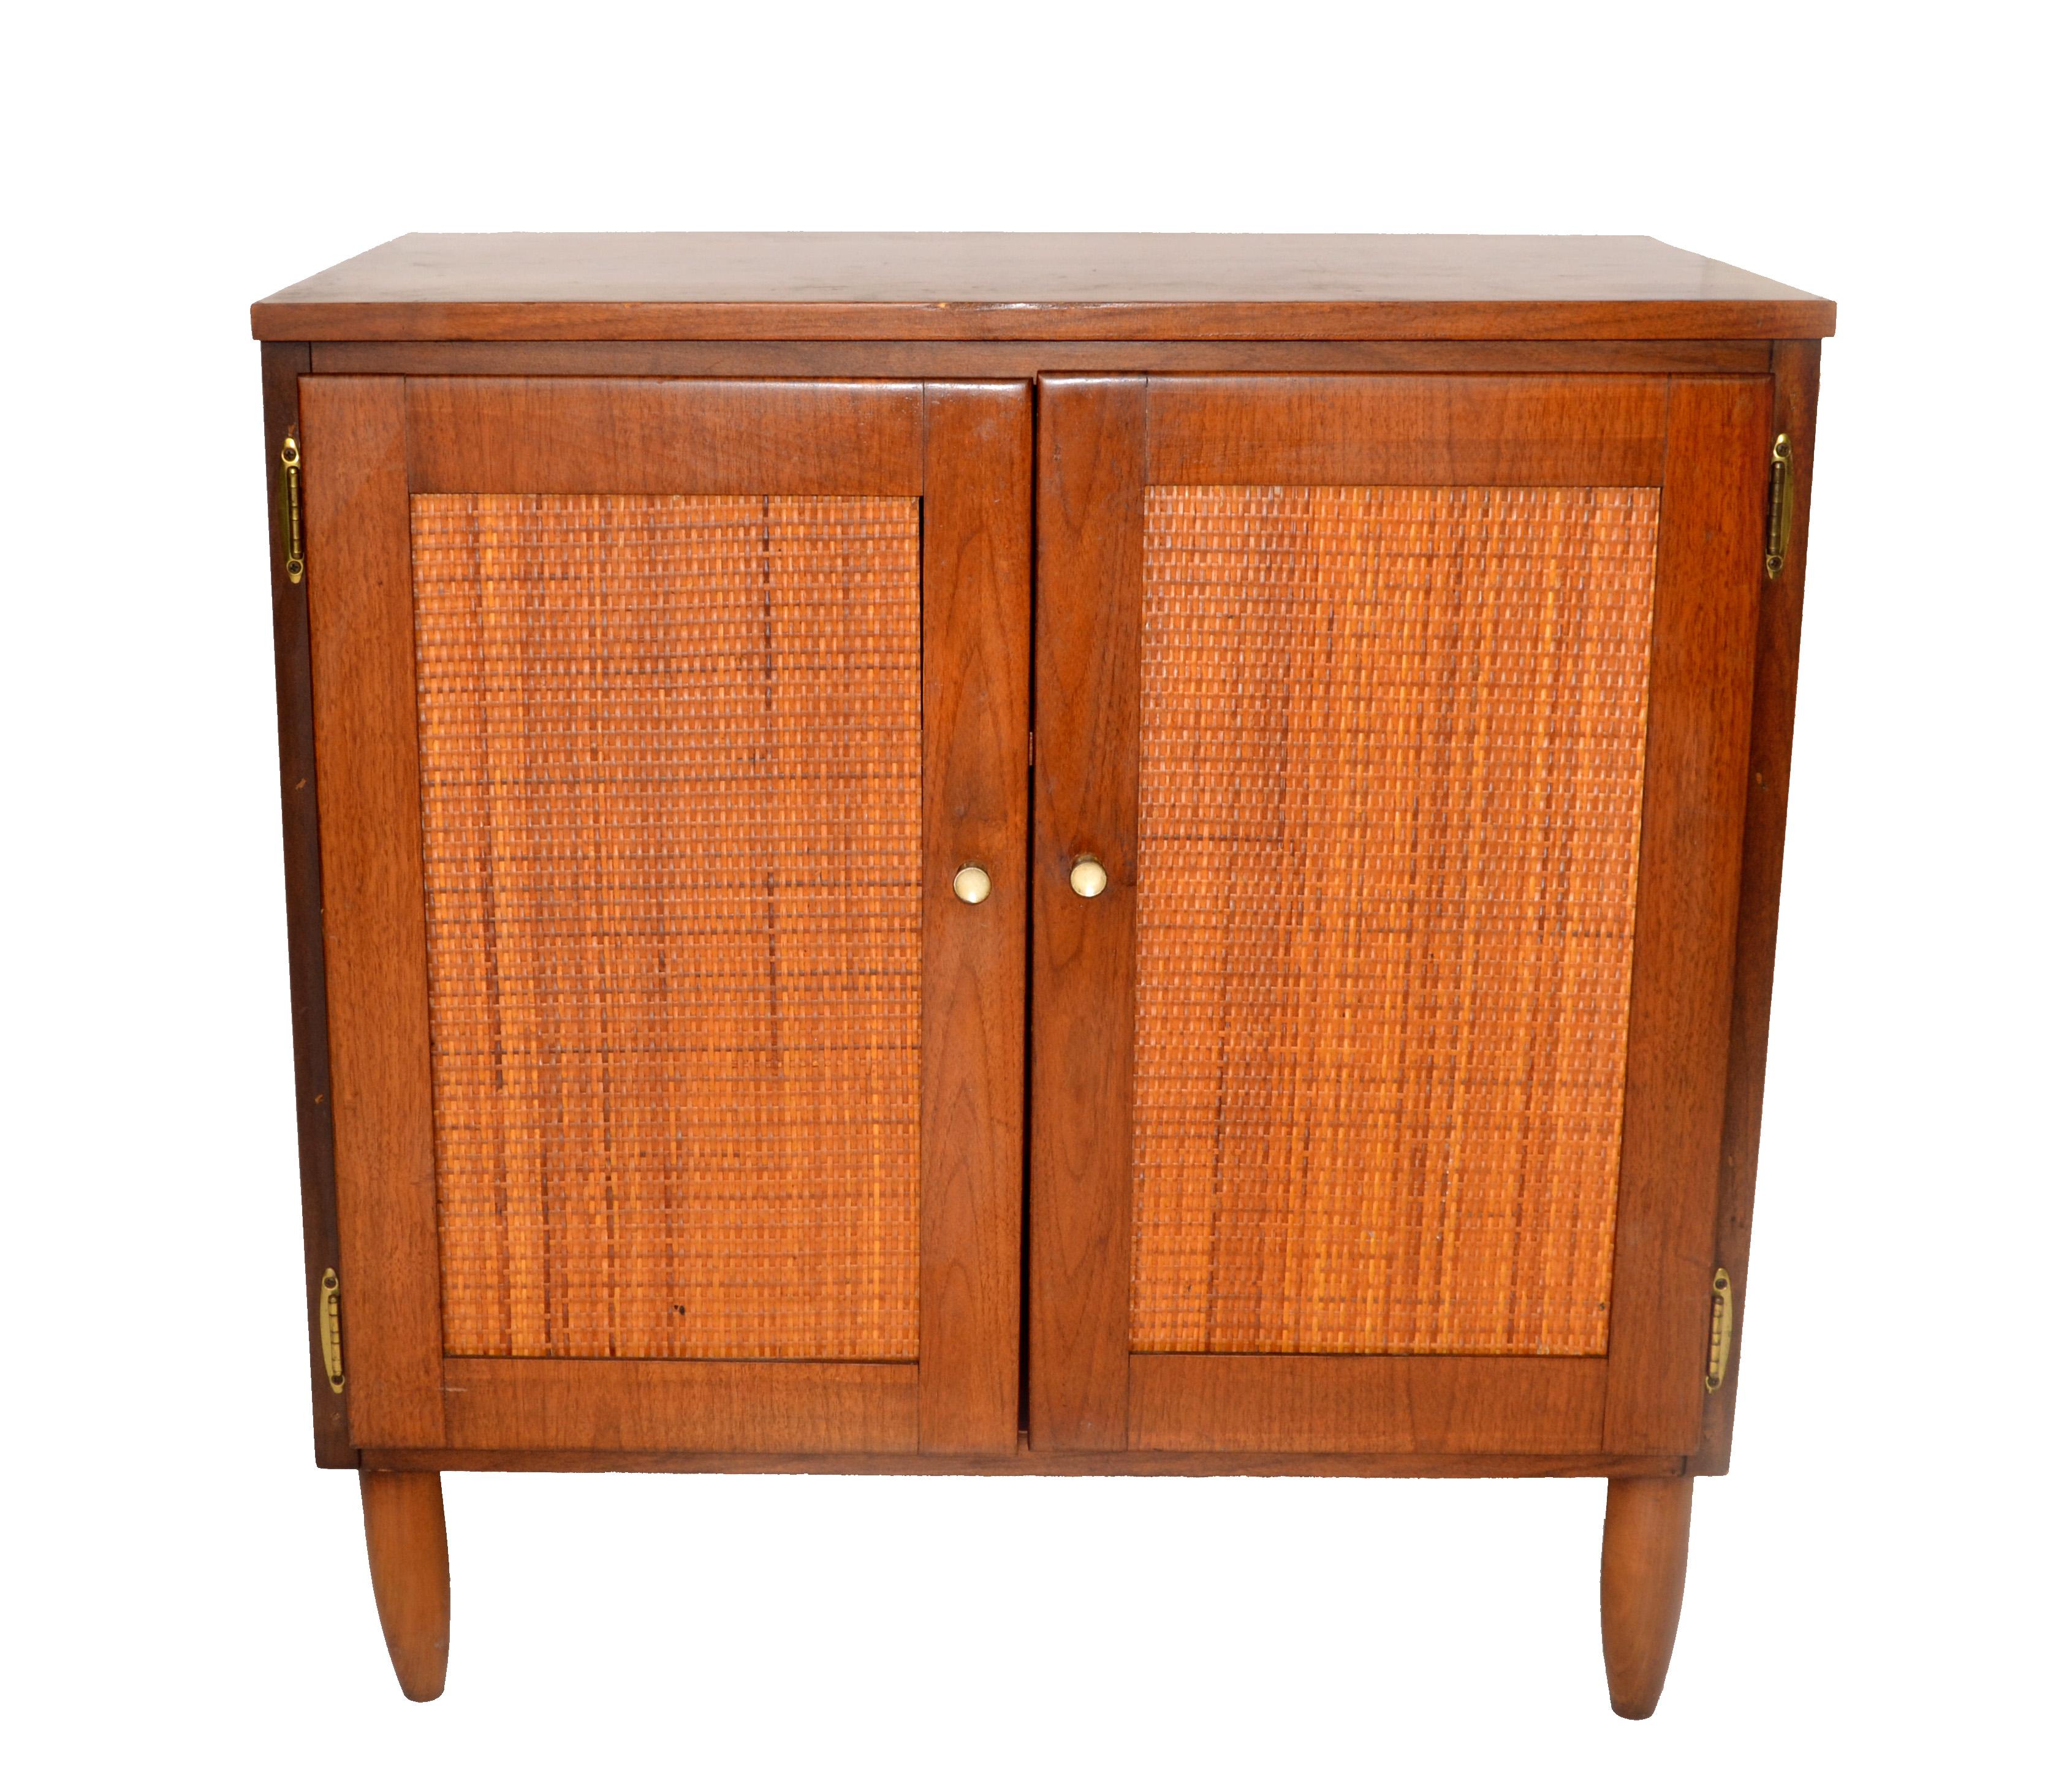 Charming 1950s Mid-Century Modern Chest, cabinet in Wood with 2 handwoven Doors.
The Interior features one shelf with plenty of storage space and the knobs are made out of Brass.
This Cabinet is perfect for small Living Settings.